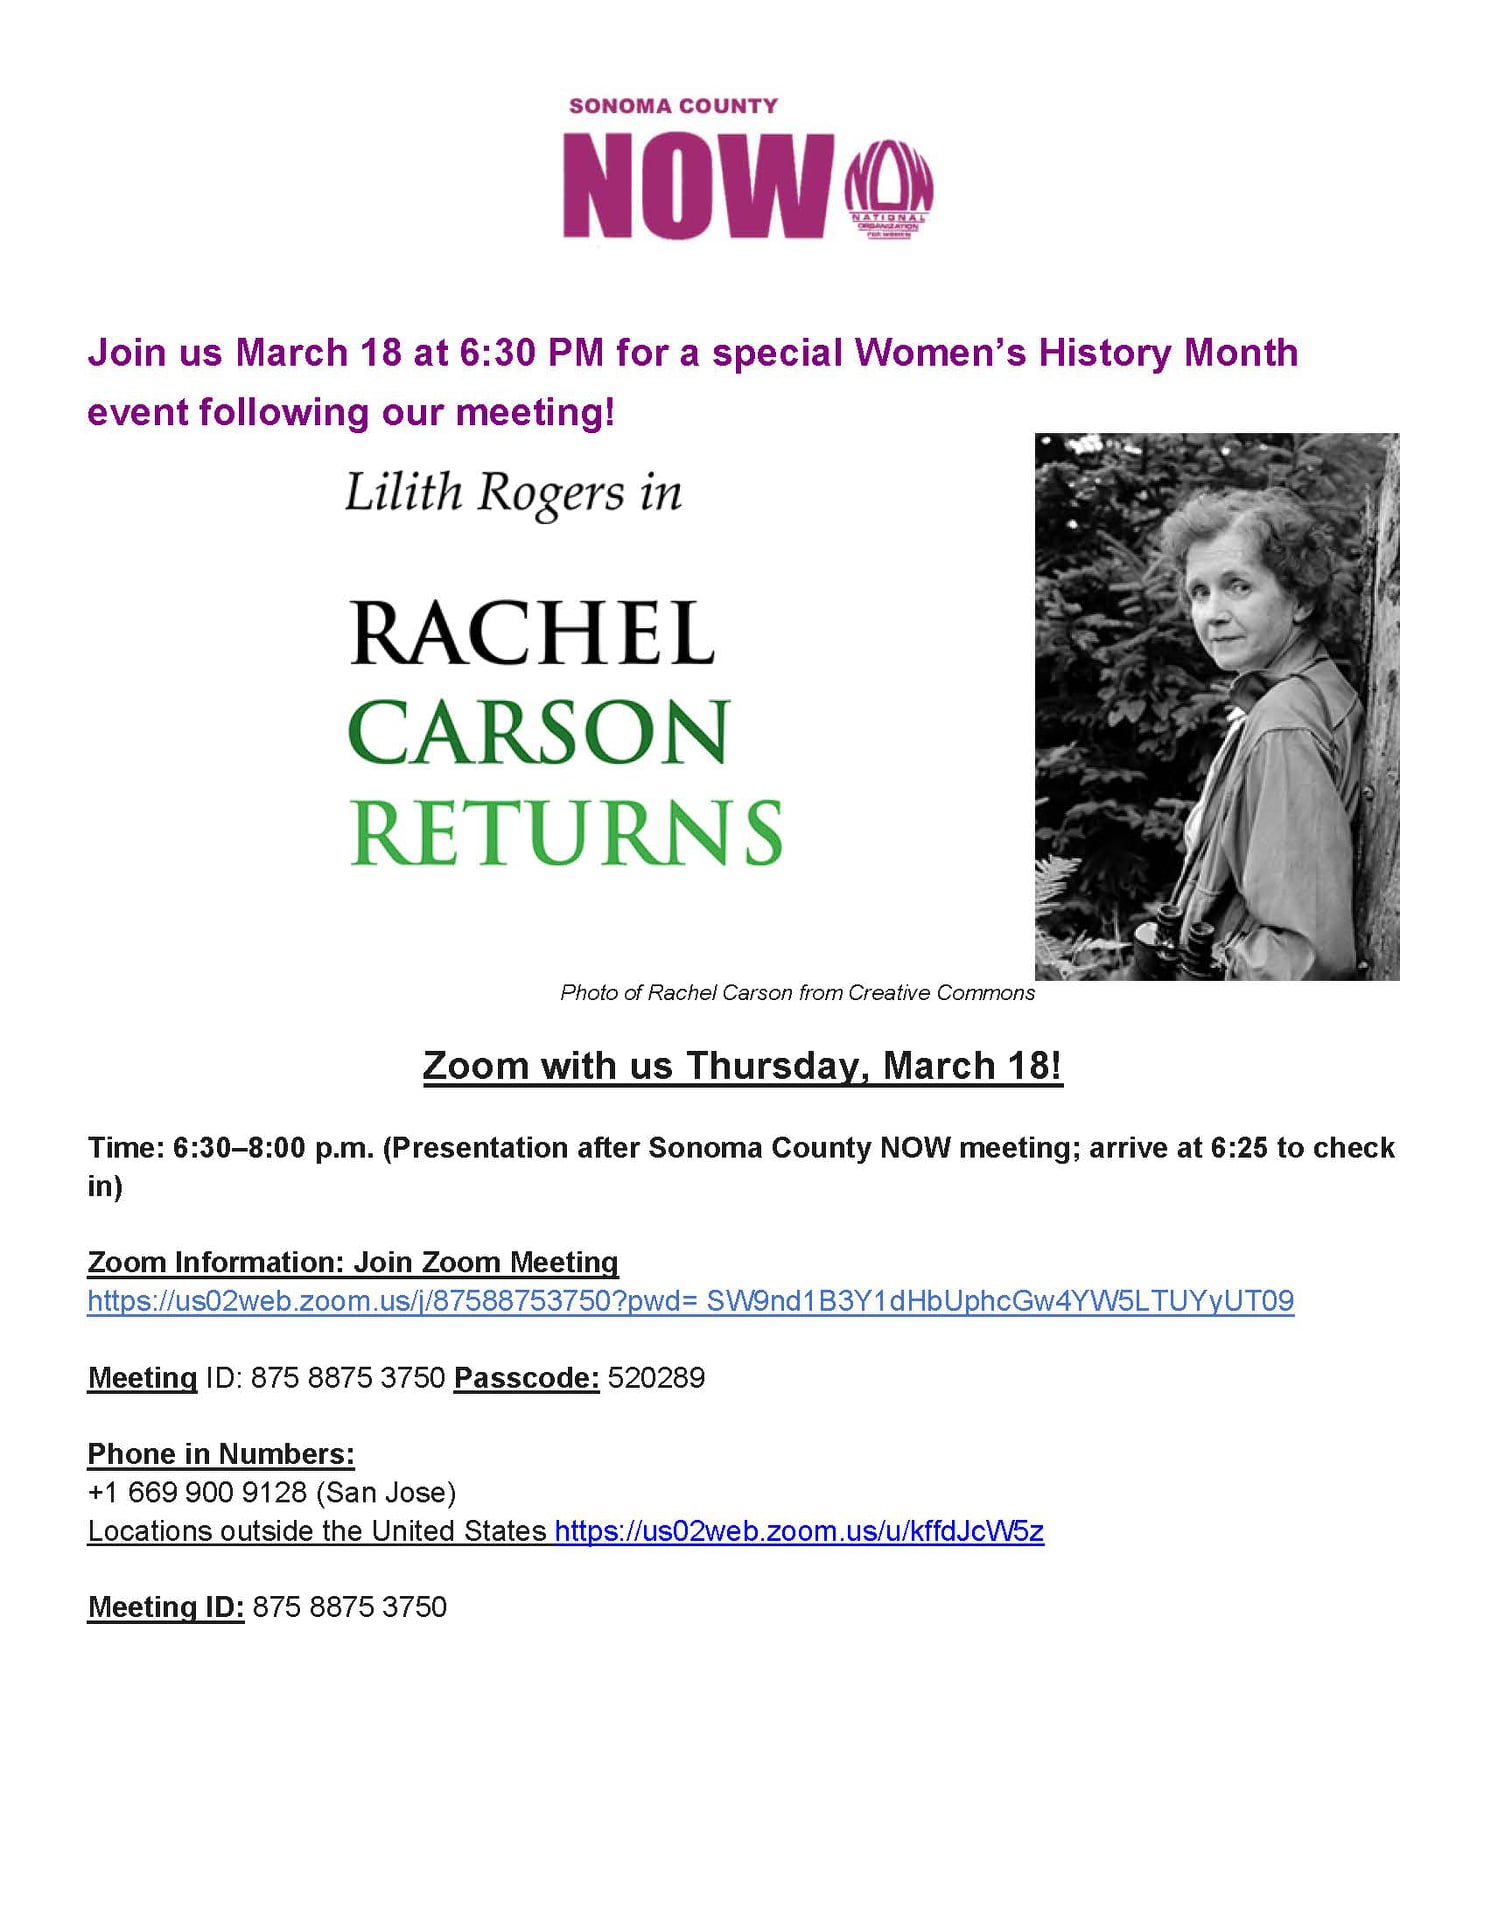 NOW Meeting March 18, 2021 Rachel Carson presentation by Liilth Rogers